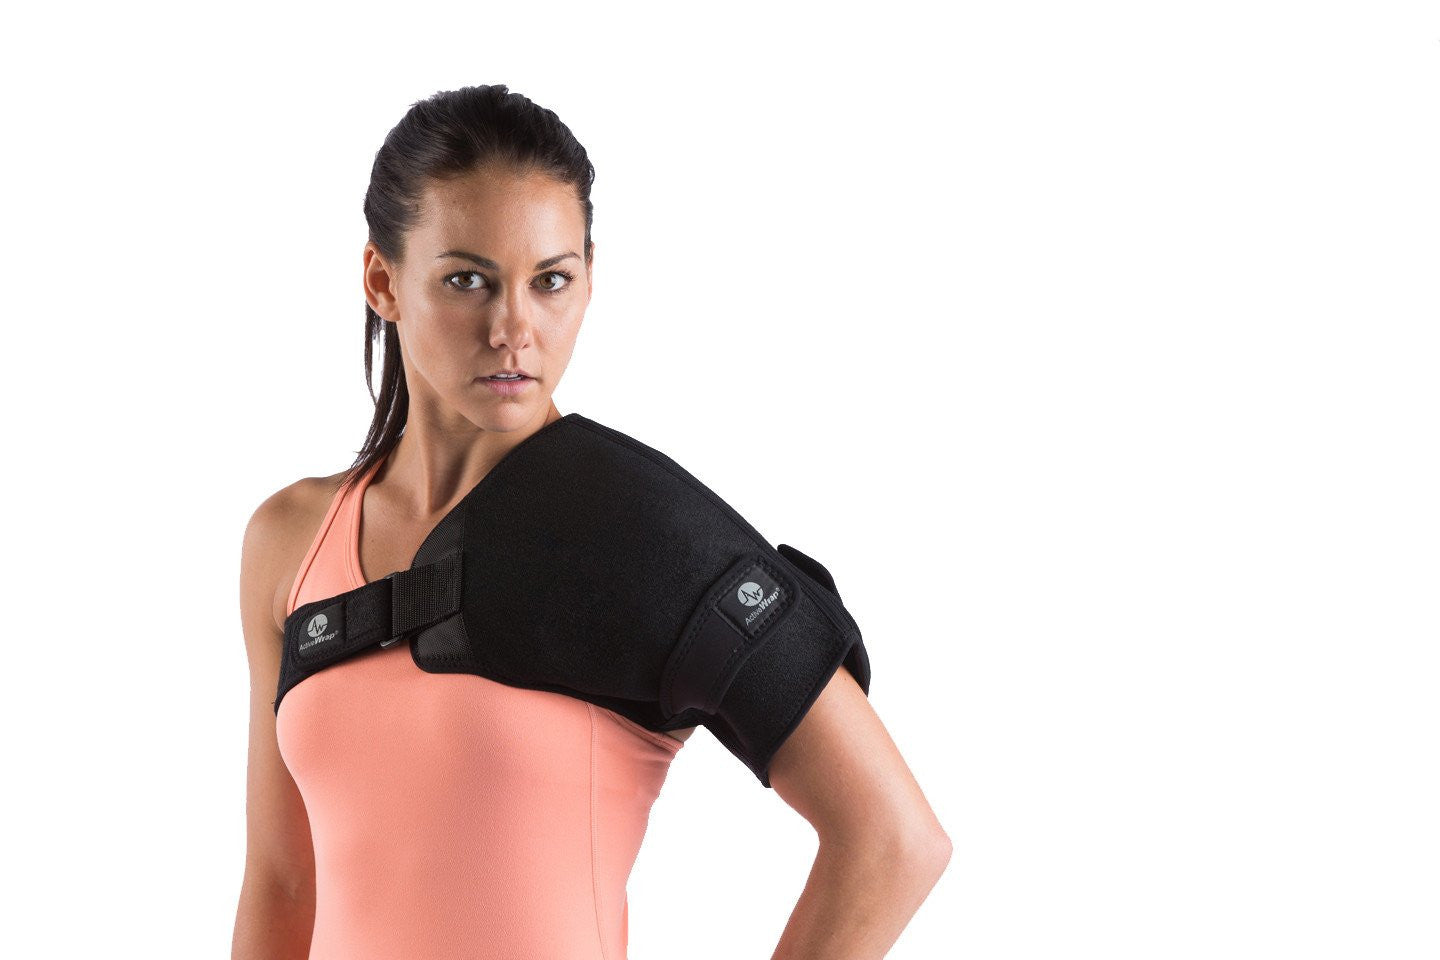 Women's Lower Back & Shoulder Therapy Wrap with Hot & Cold Gel Pack